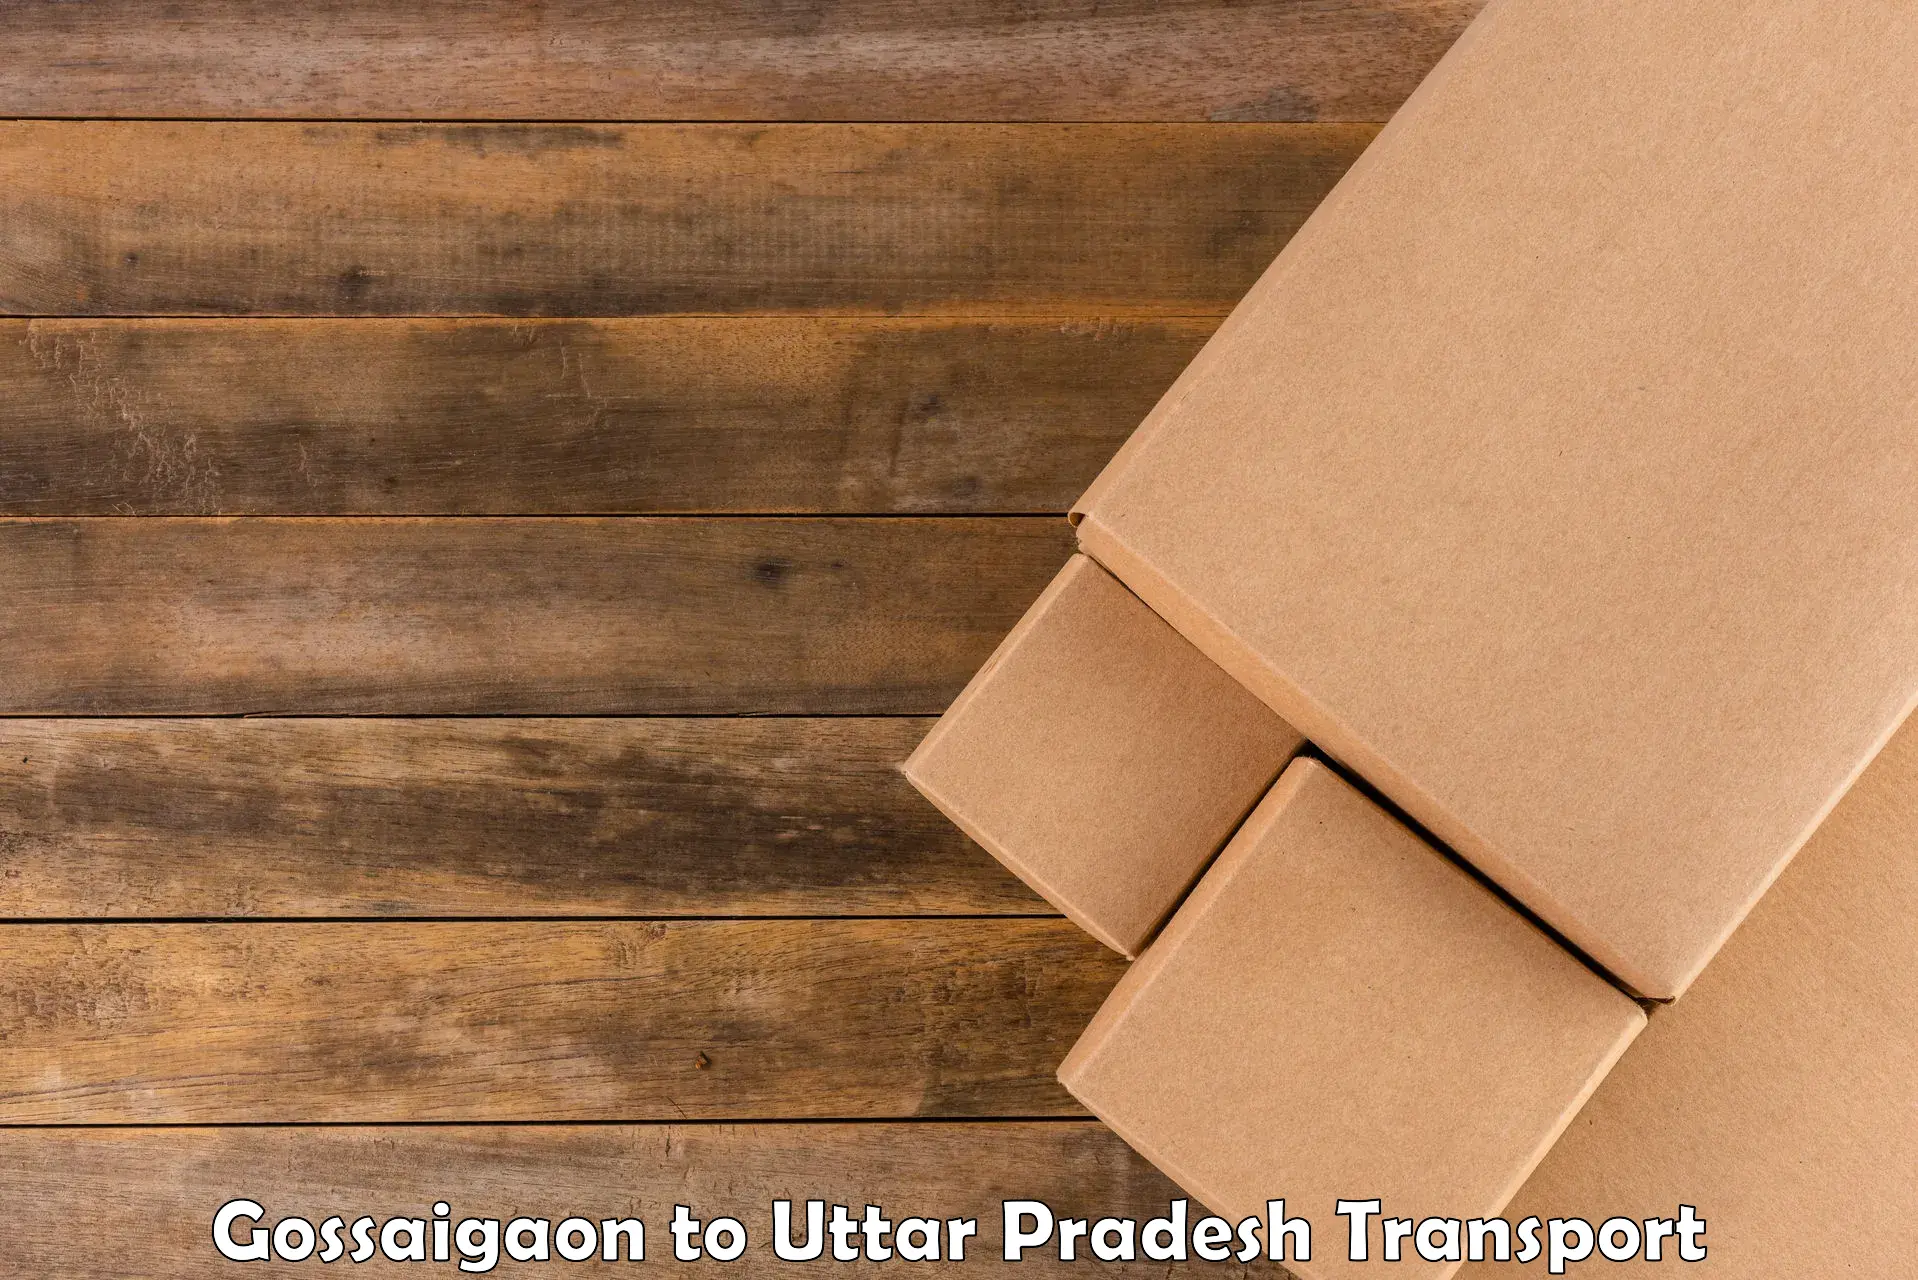 Truck transport companies in India Gossaigaon to Unnao